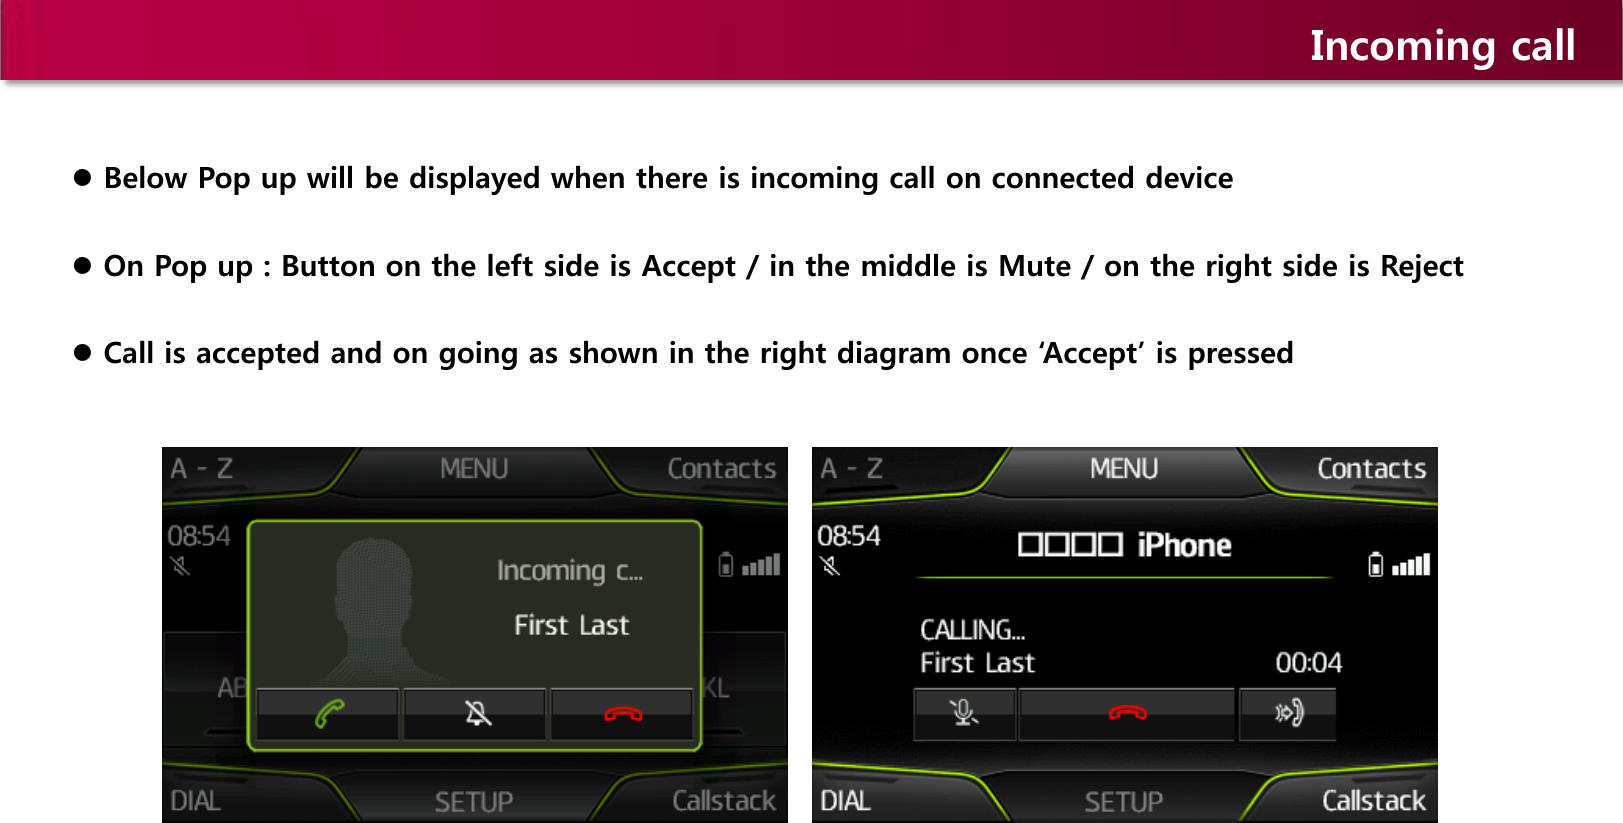 Incoming call  Below Pop up will be displayed when there is incoming call on connected device  On Pop up : Button on the left side is Accept / in the middle is Mute / on the right side is Reject   Call is accepted and on going as shown in the right diagram once ‘Accept’ is pressed 